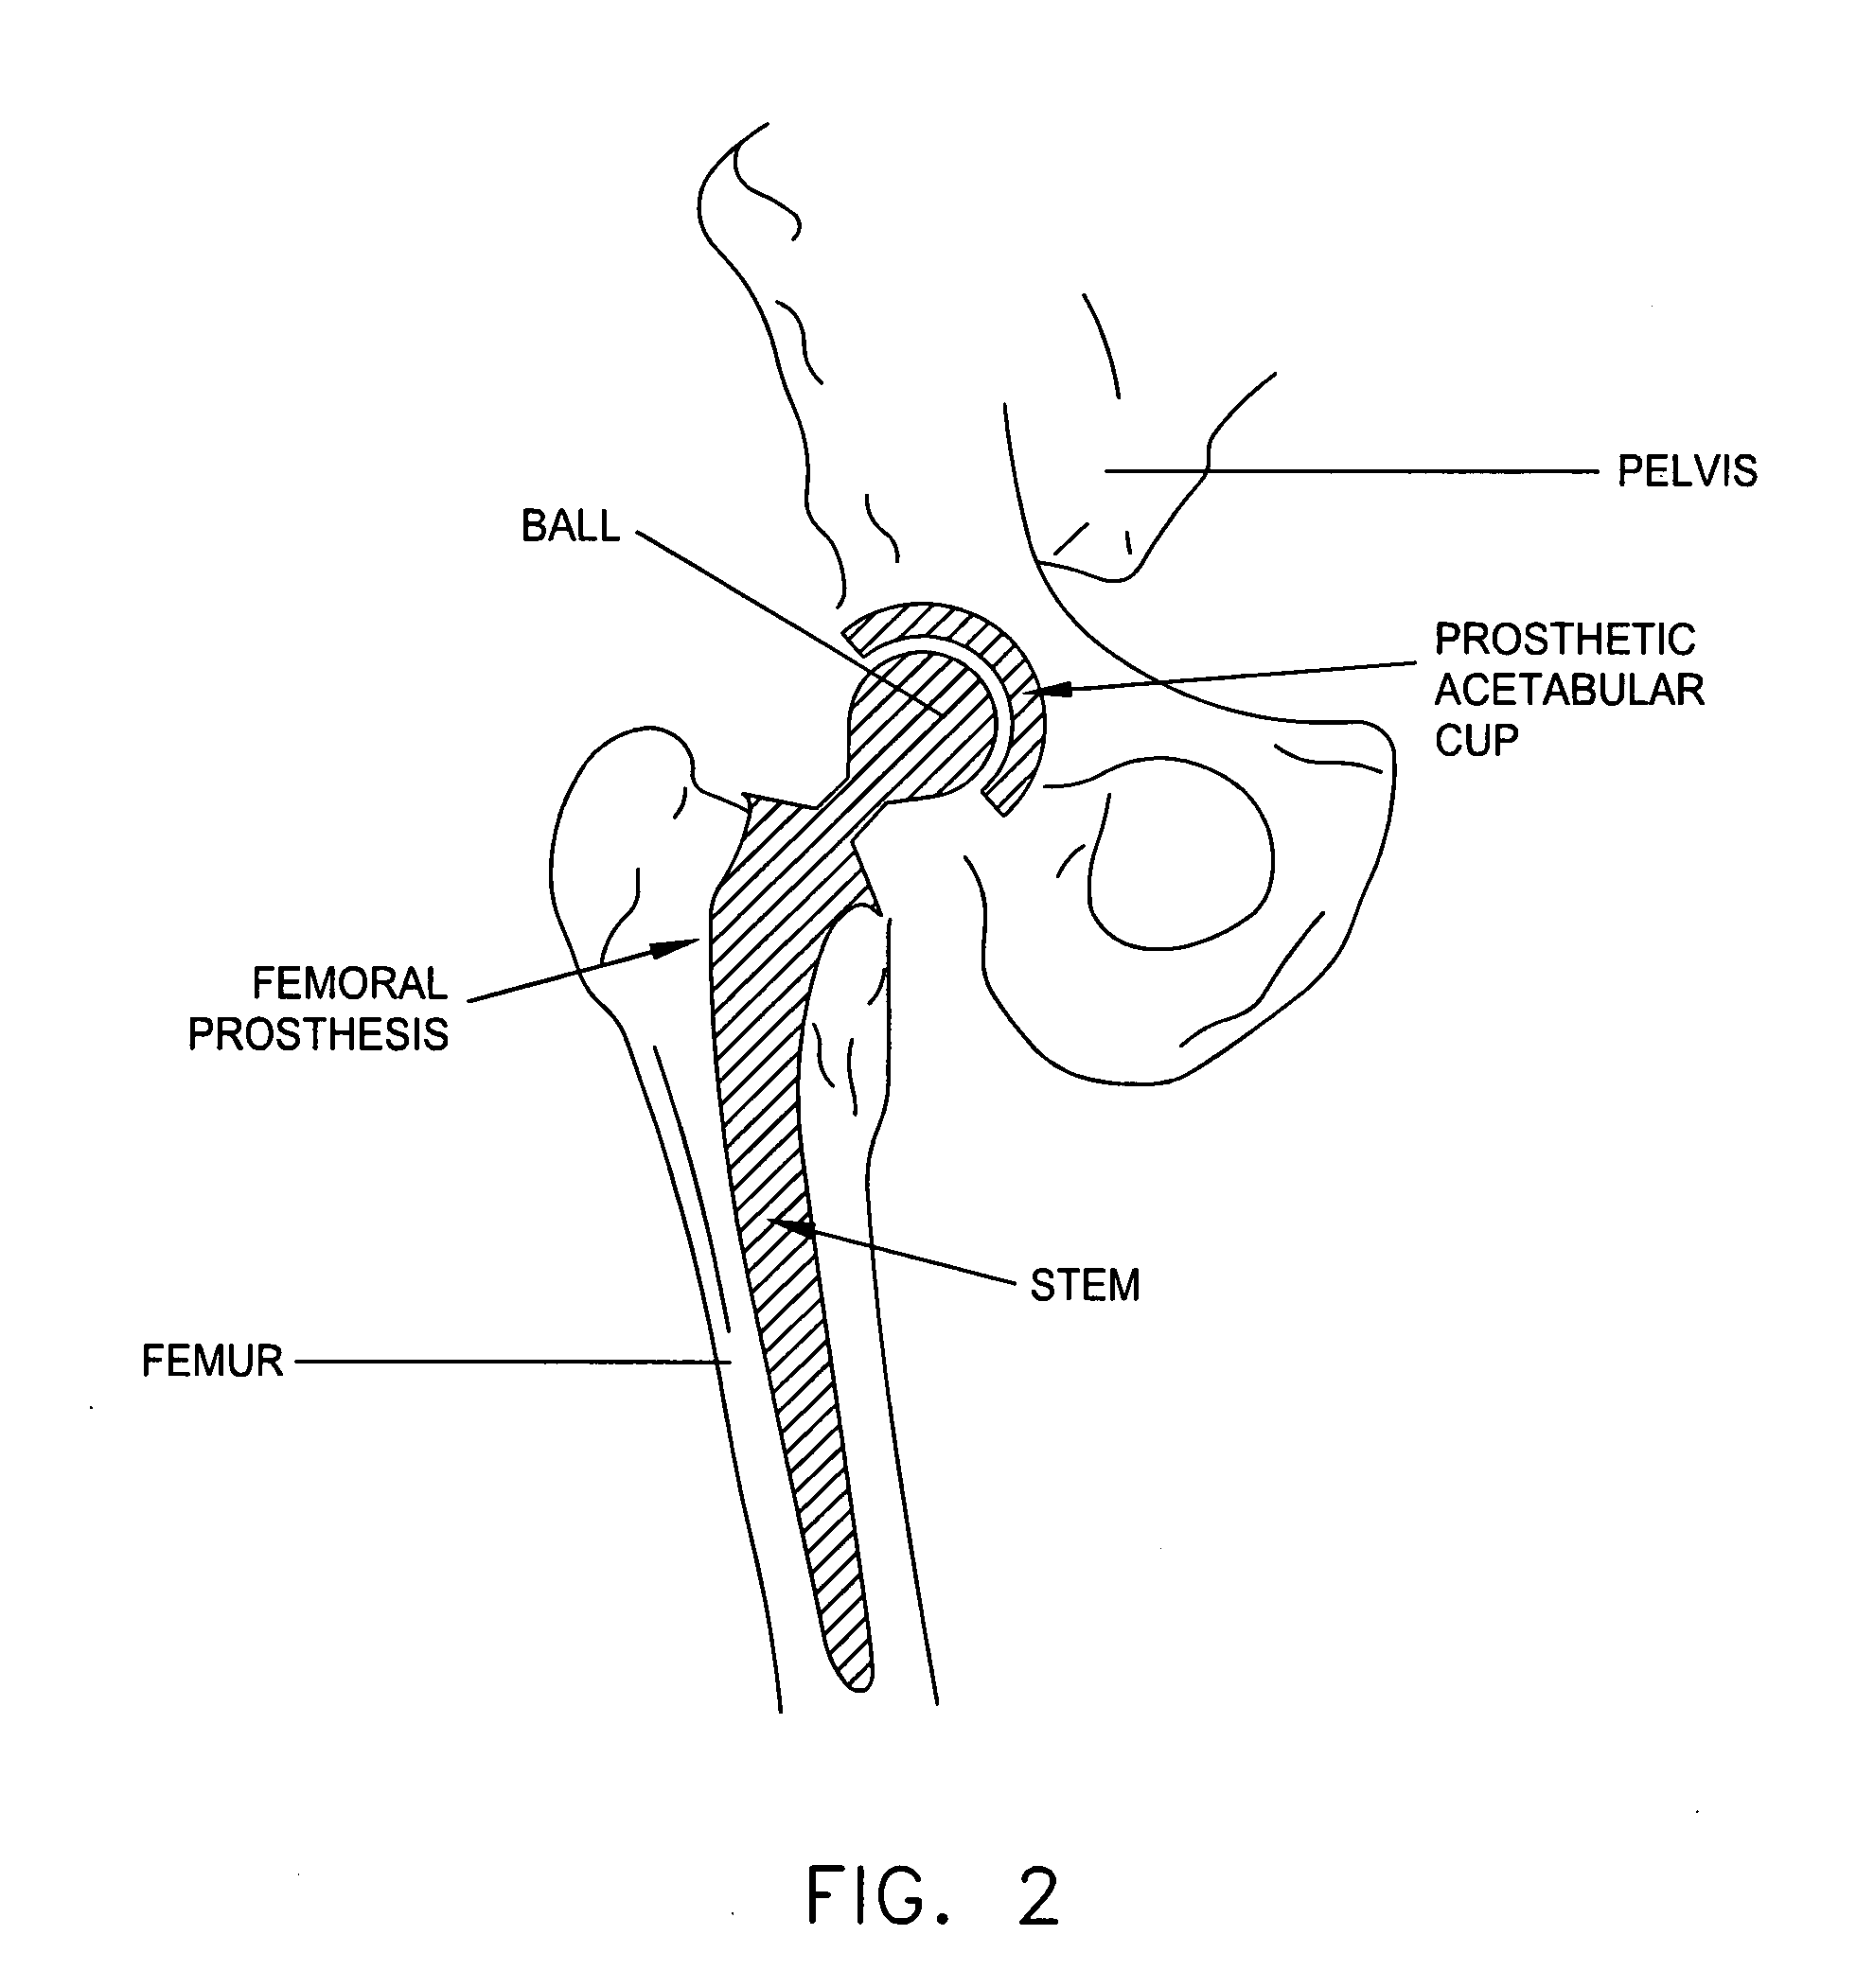 Computer-guided system for orienting the acetabular cup in the pelvis during total hip replacement surgery